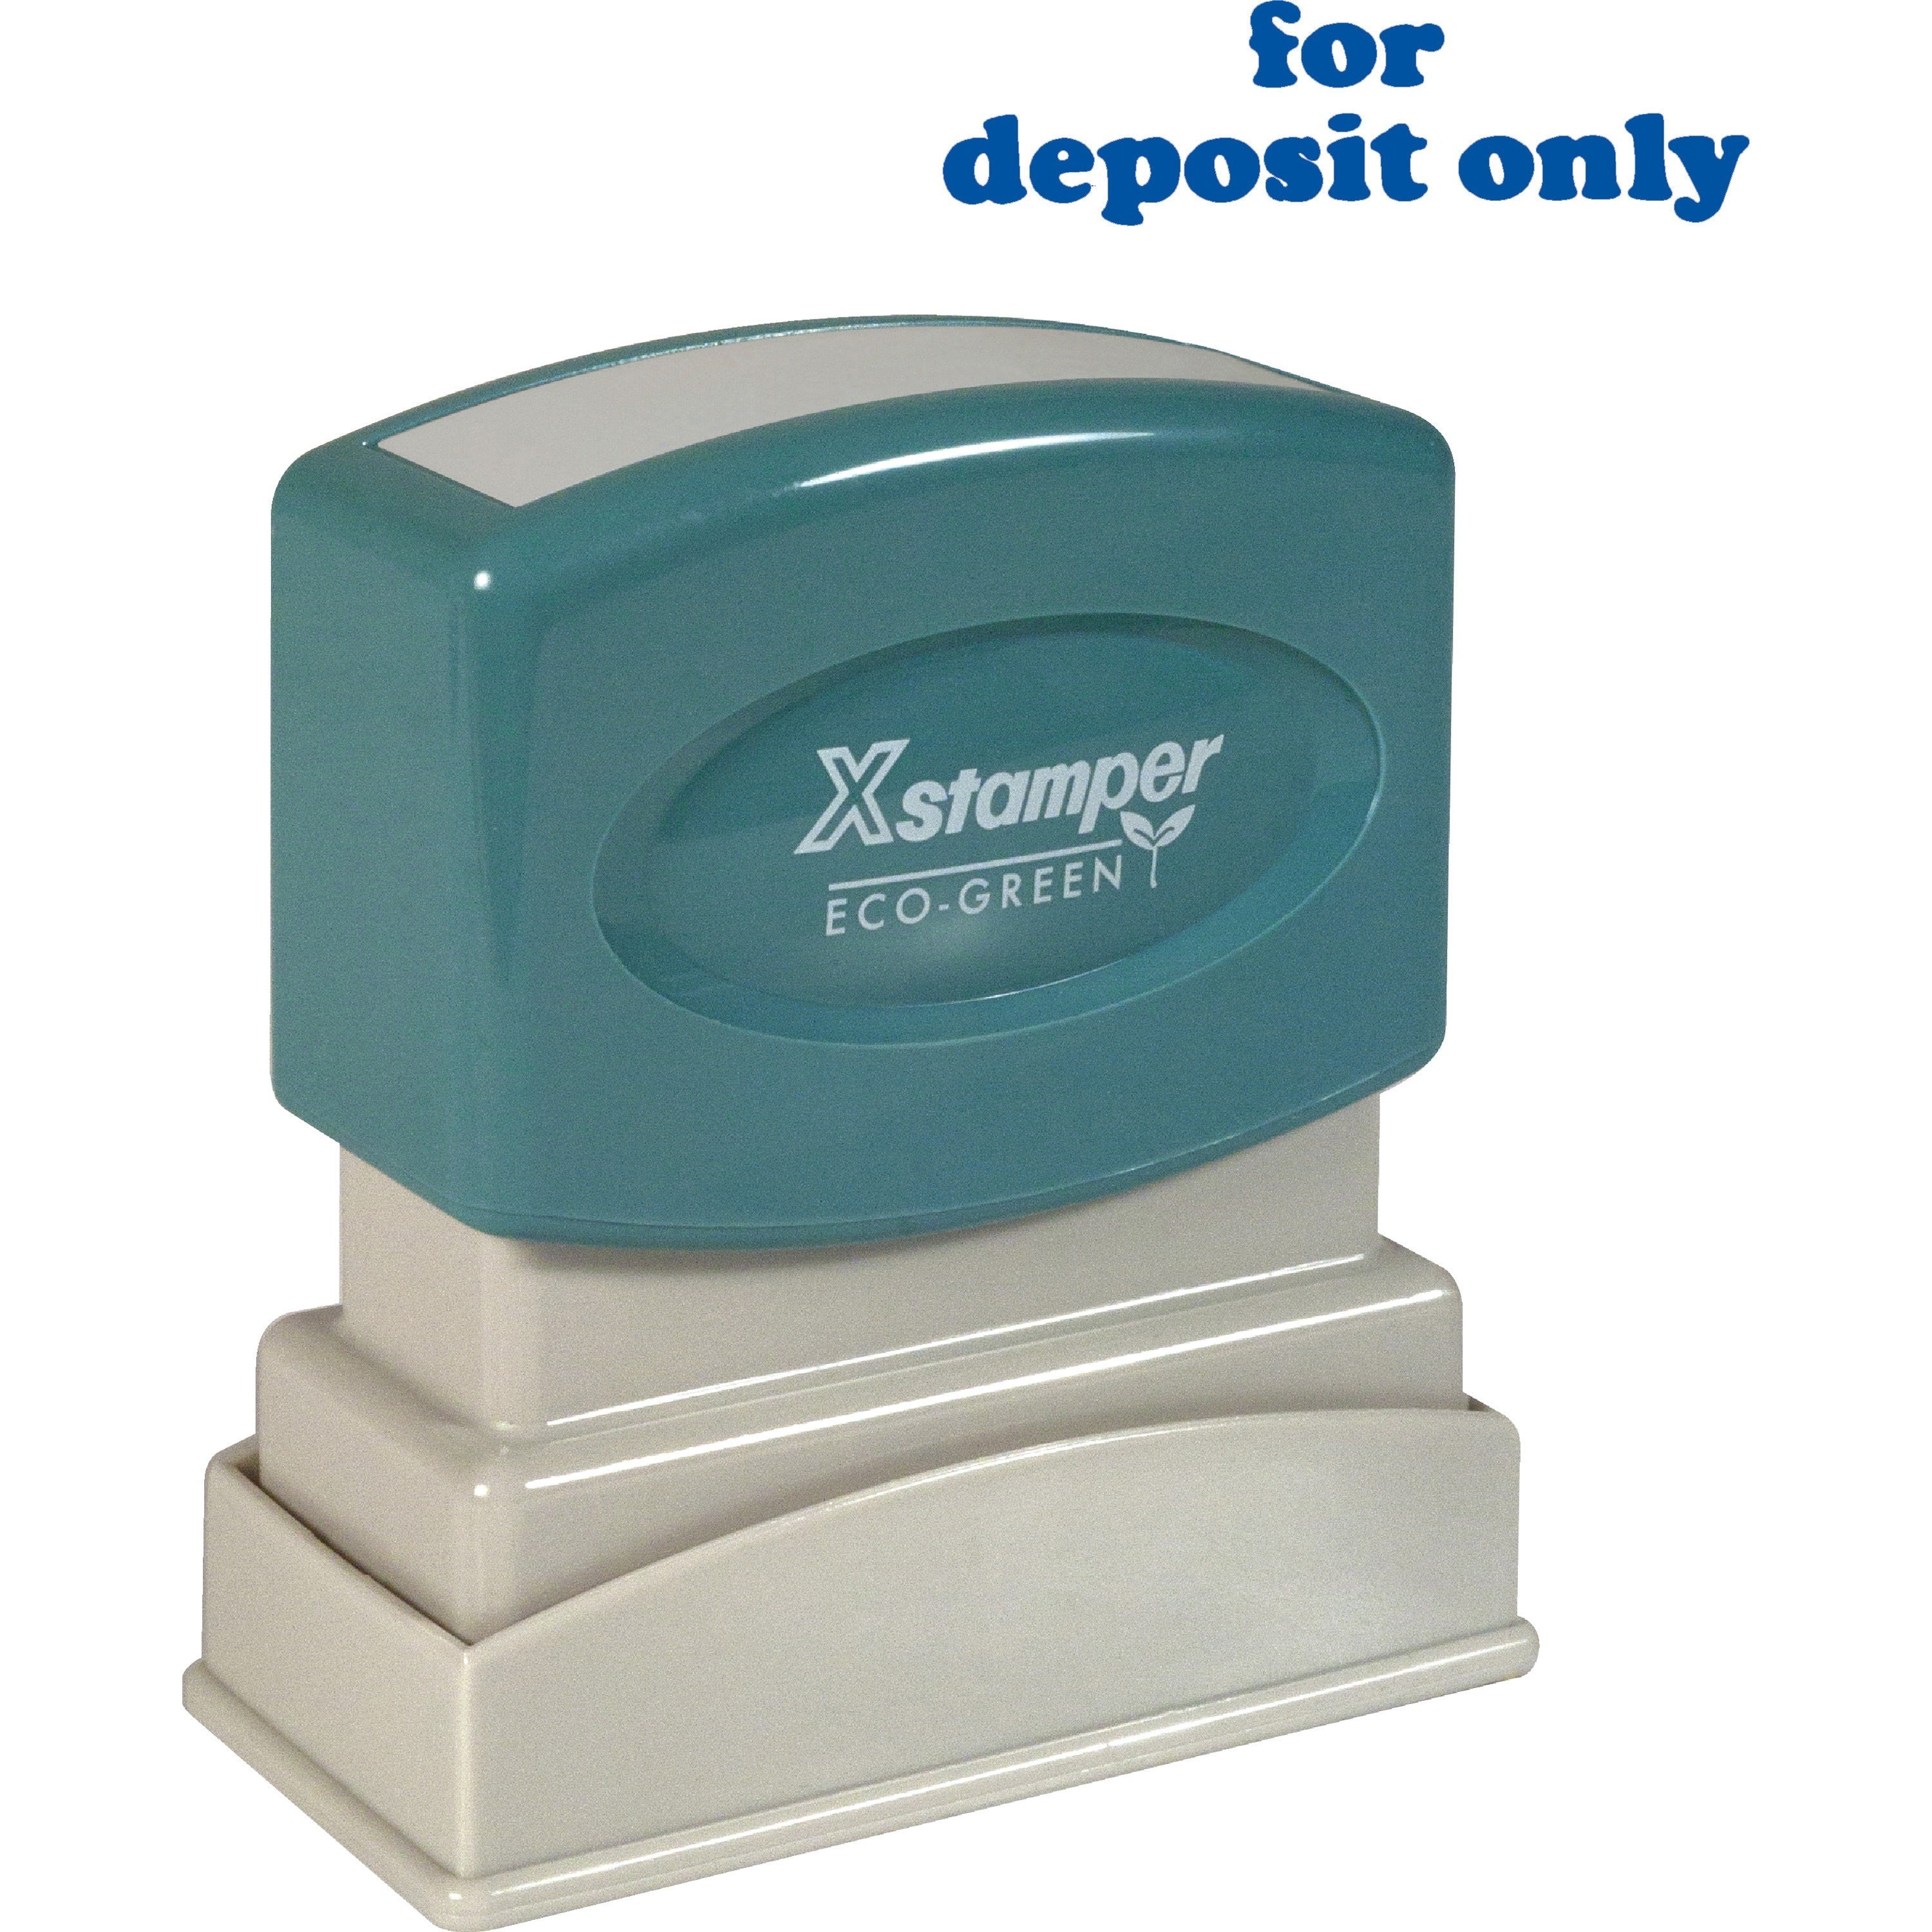 Xstamper "for deposit only" Title Stamp - Message Stamp - "FOR DEPOSIT ONLY" - 0.50" Impression Width x 1.62" Impression Length - 100000 Impression(s) - Blue - Recycled - 1 Each - 